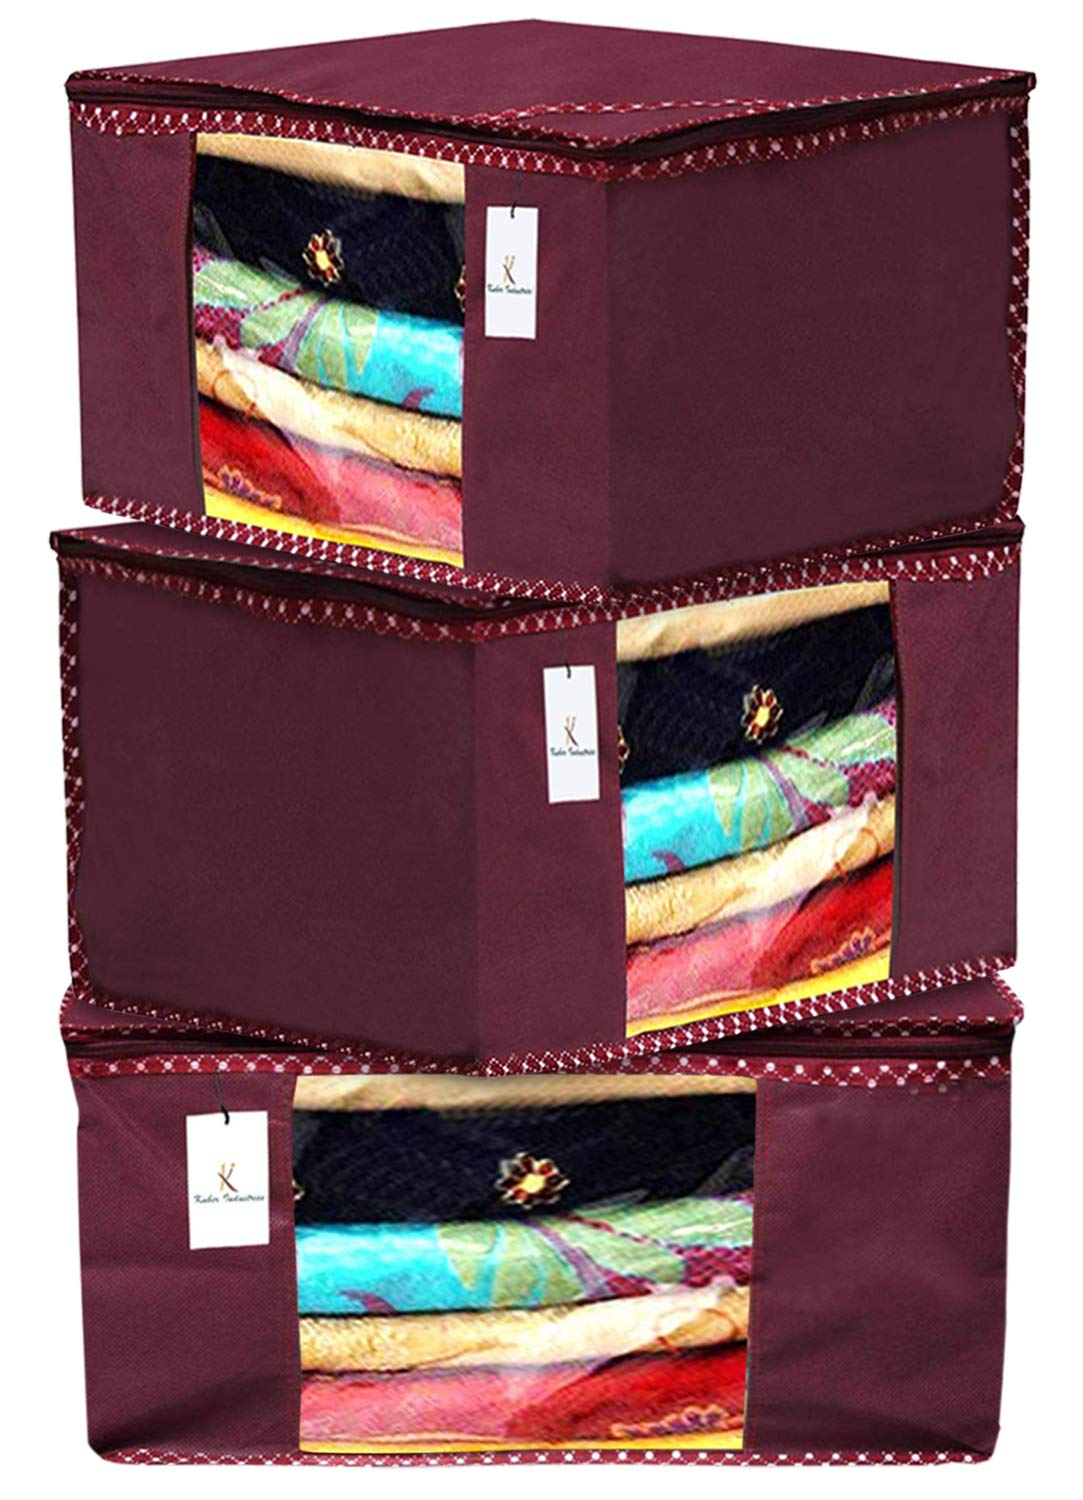 Kuber Industries 3 Pieces Non Woven Fabric Saree Cover/Clothes Organizer for Wardrobe Set with Transparent Window, Extra Large (Maroon)| Stylish and Practical Closet Organizers